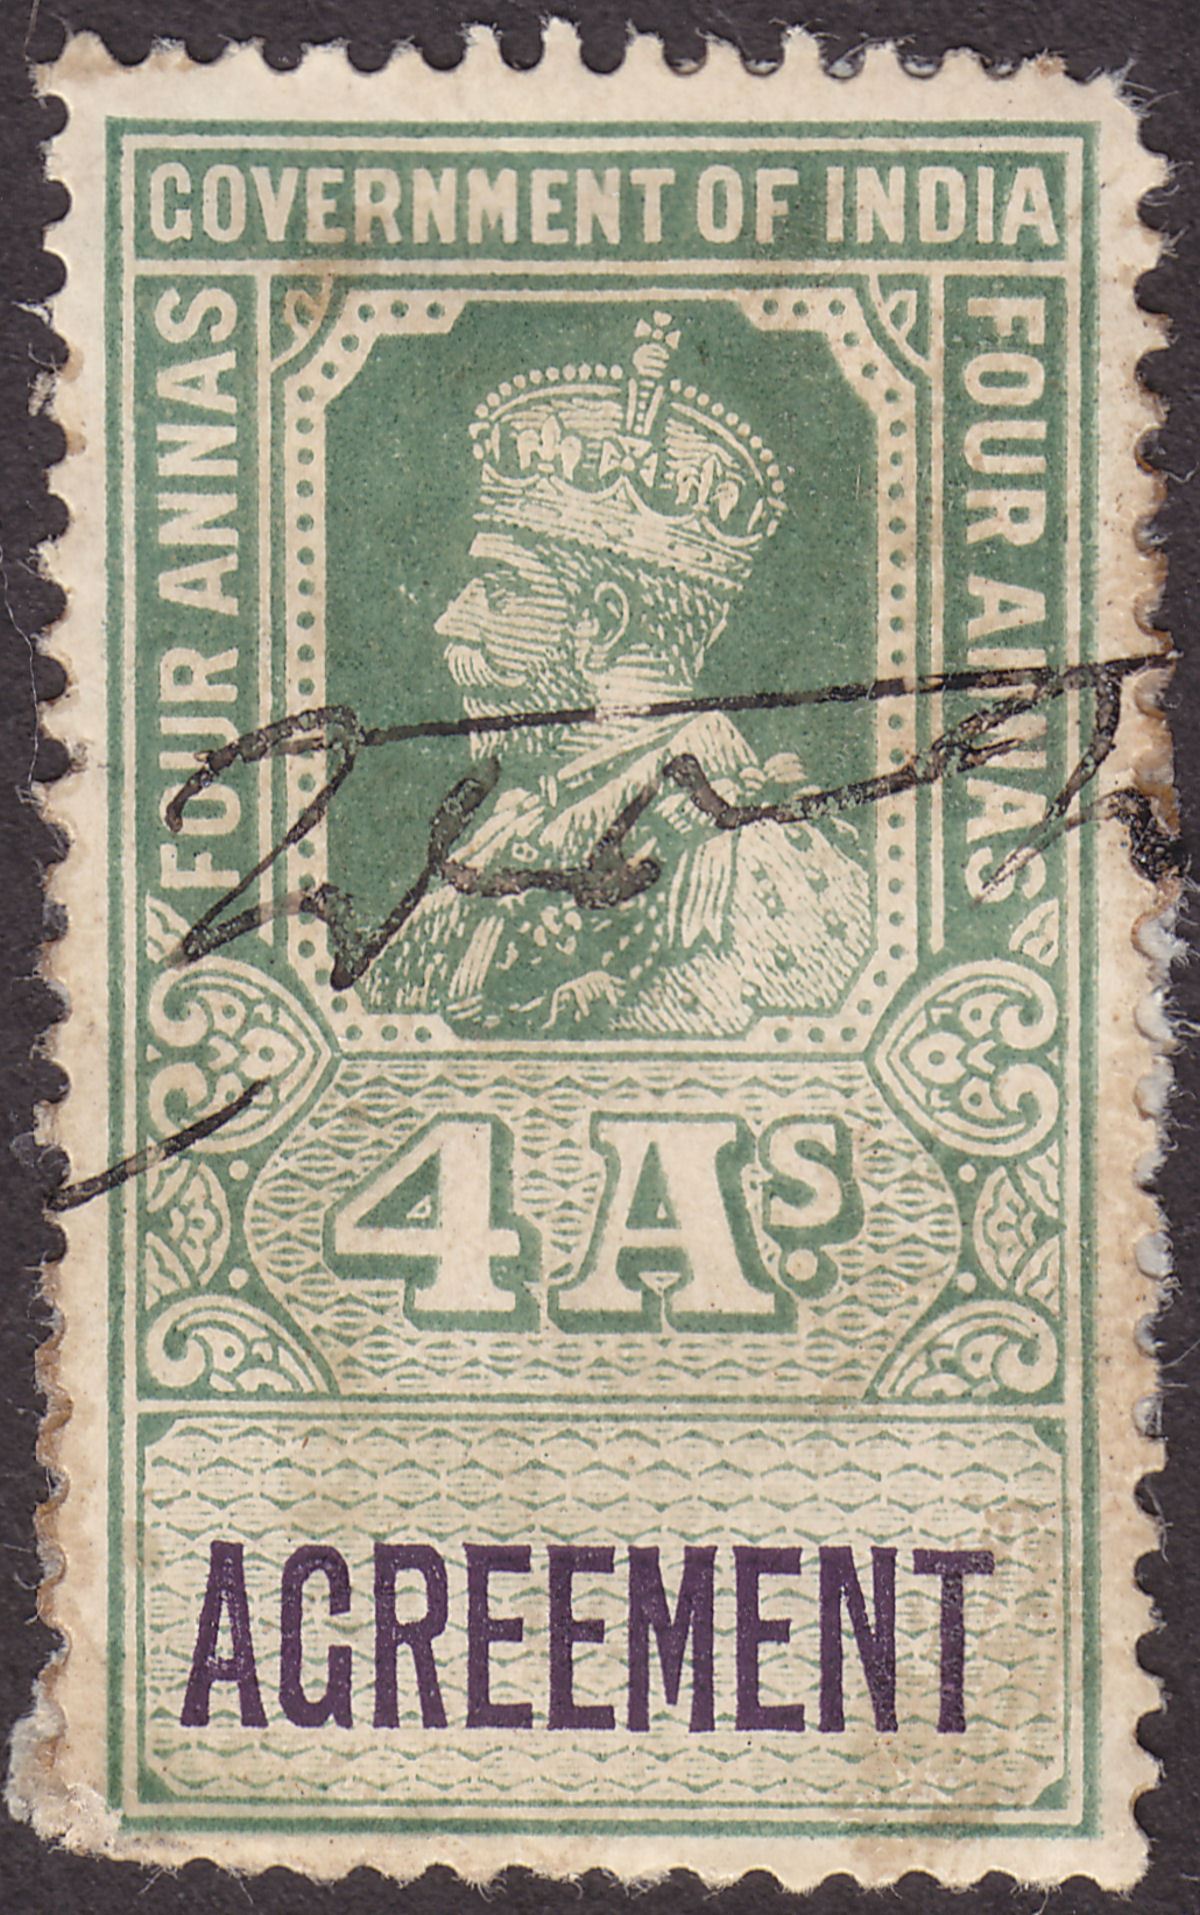 India 1923 KGV Revenue Agreement 4a Green and Black Used BF9?